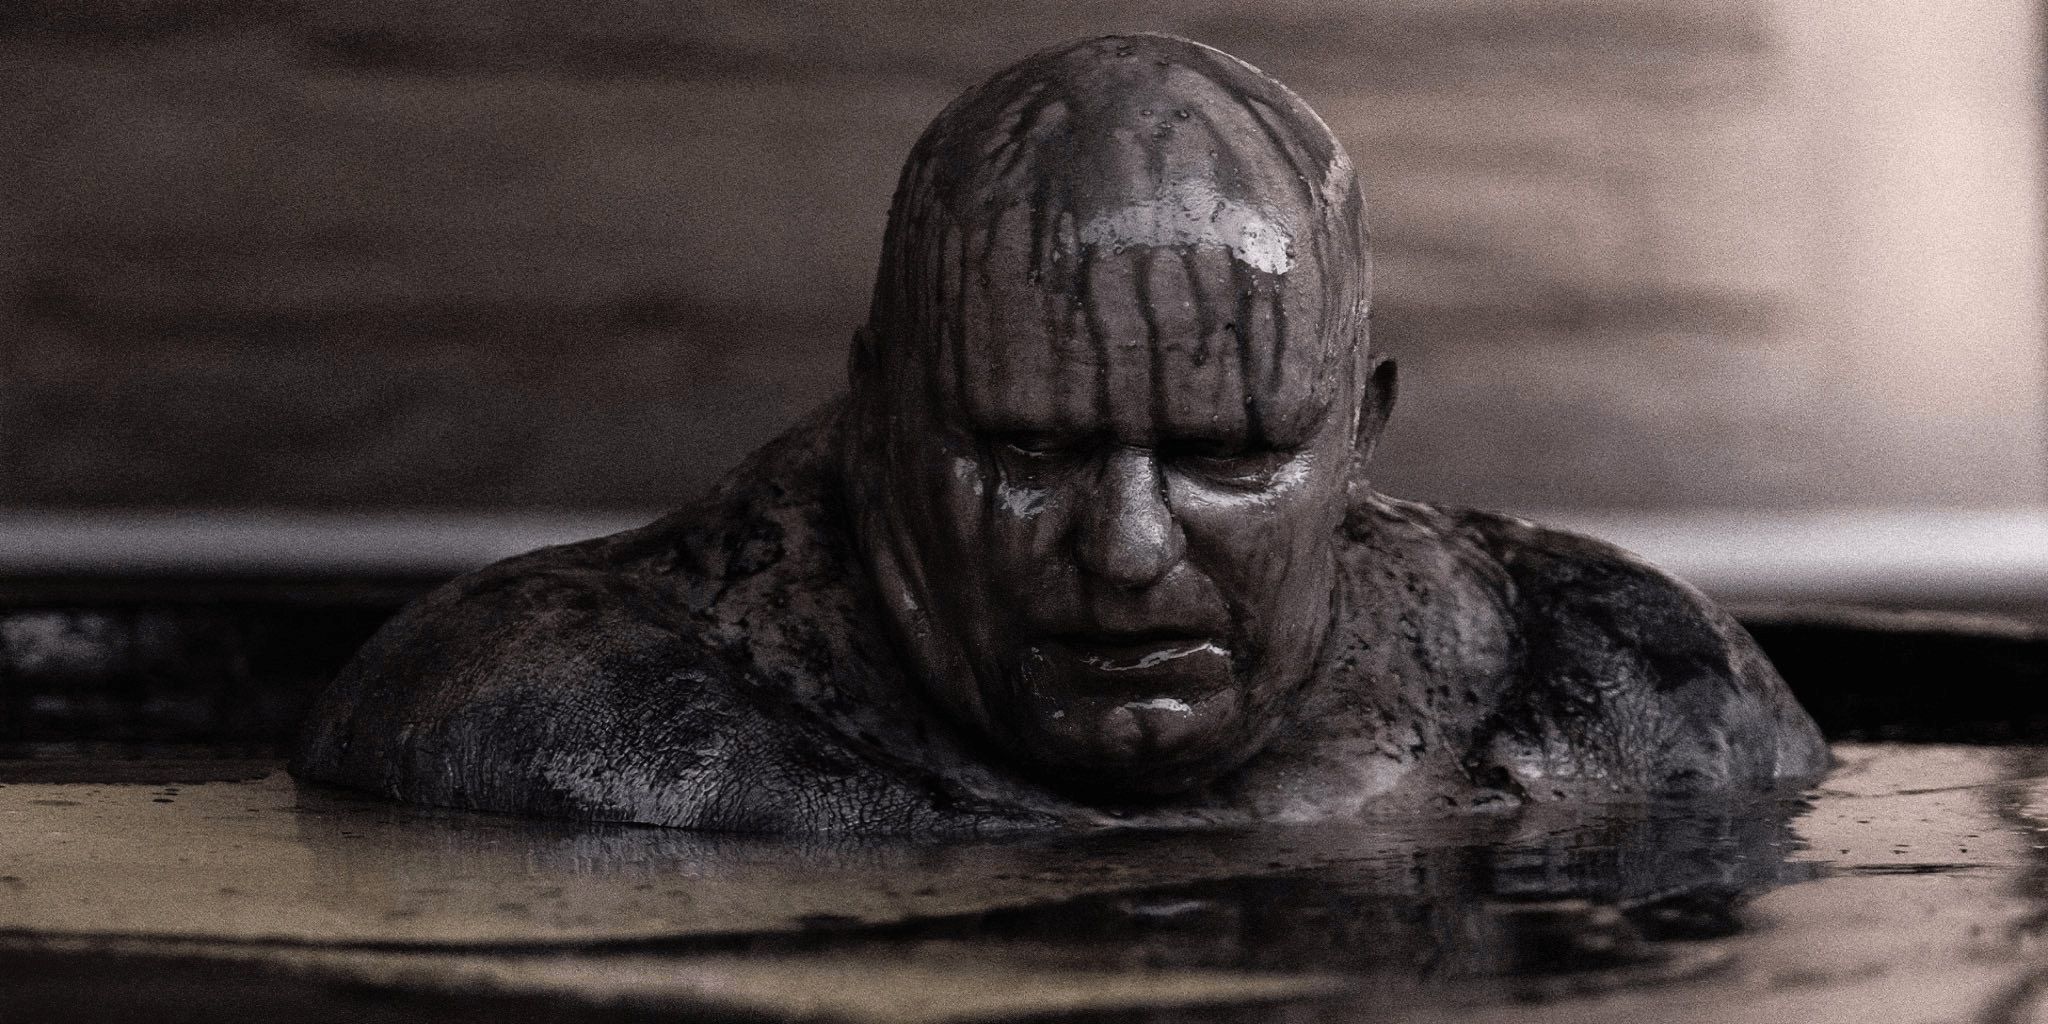 Baron Harkonnen emerges from a bath of black oil in Dune.